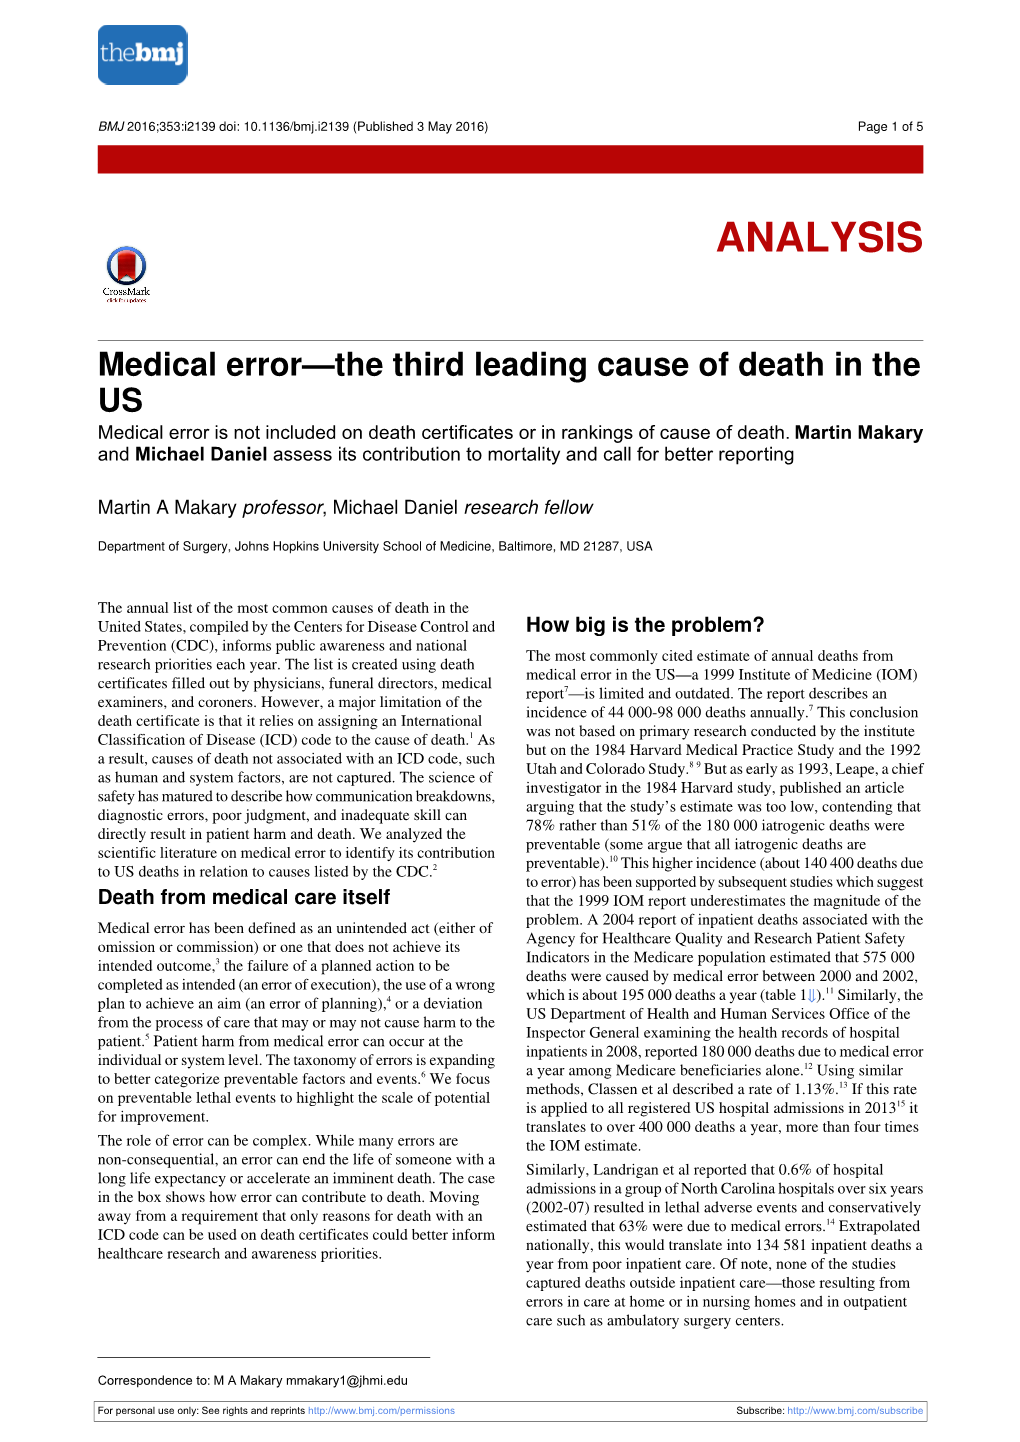 Medical Error—The Third Leading Cause of Death in the US Medical Error Is Not Included on Death Certificates Or in Rankings of Cause of Death